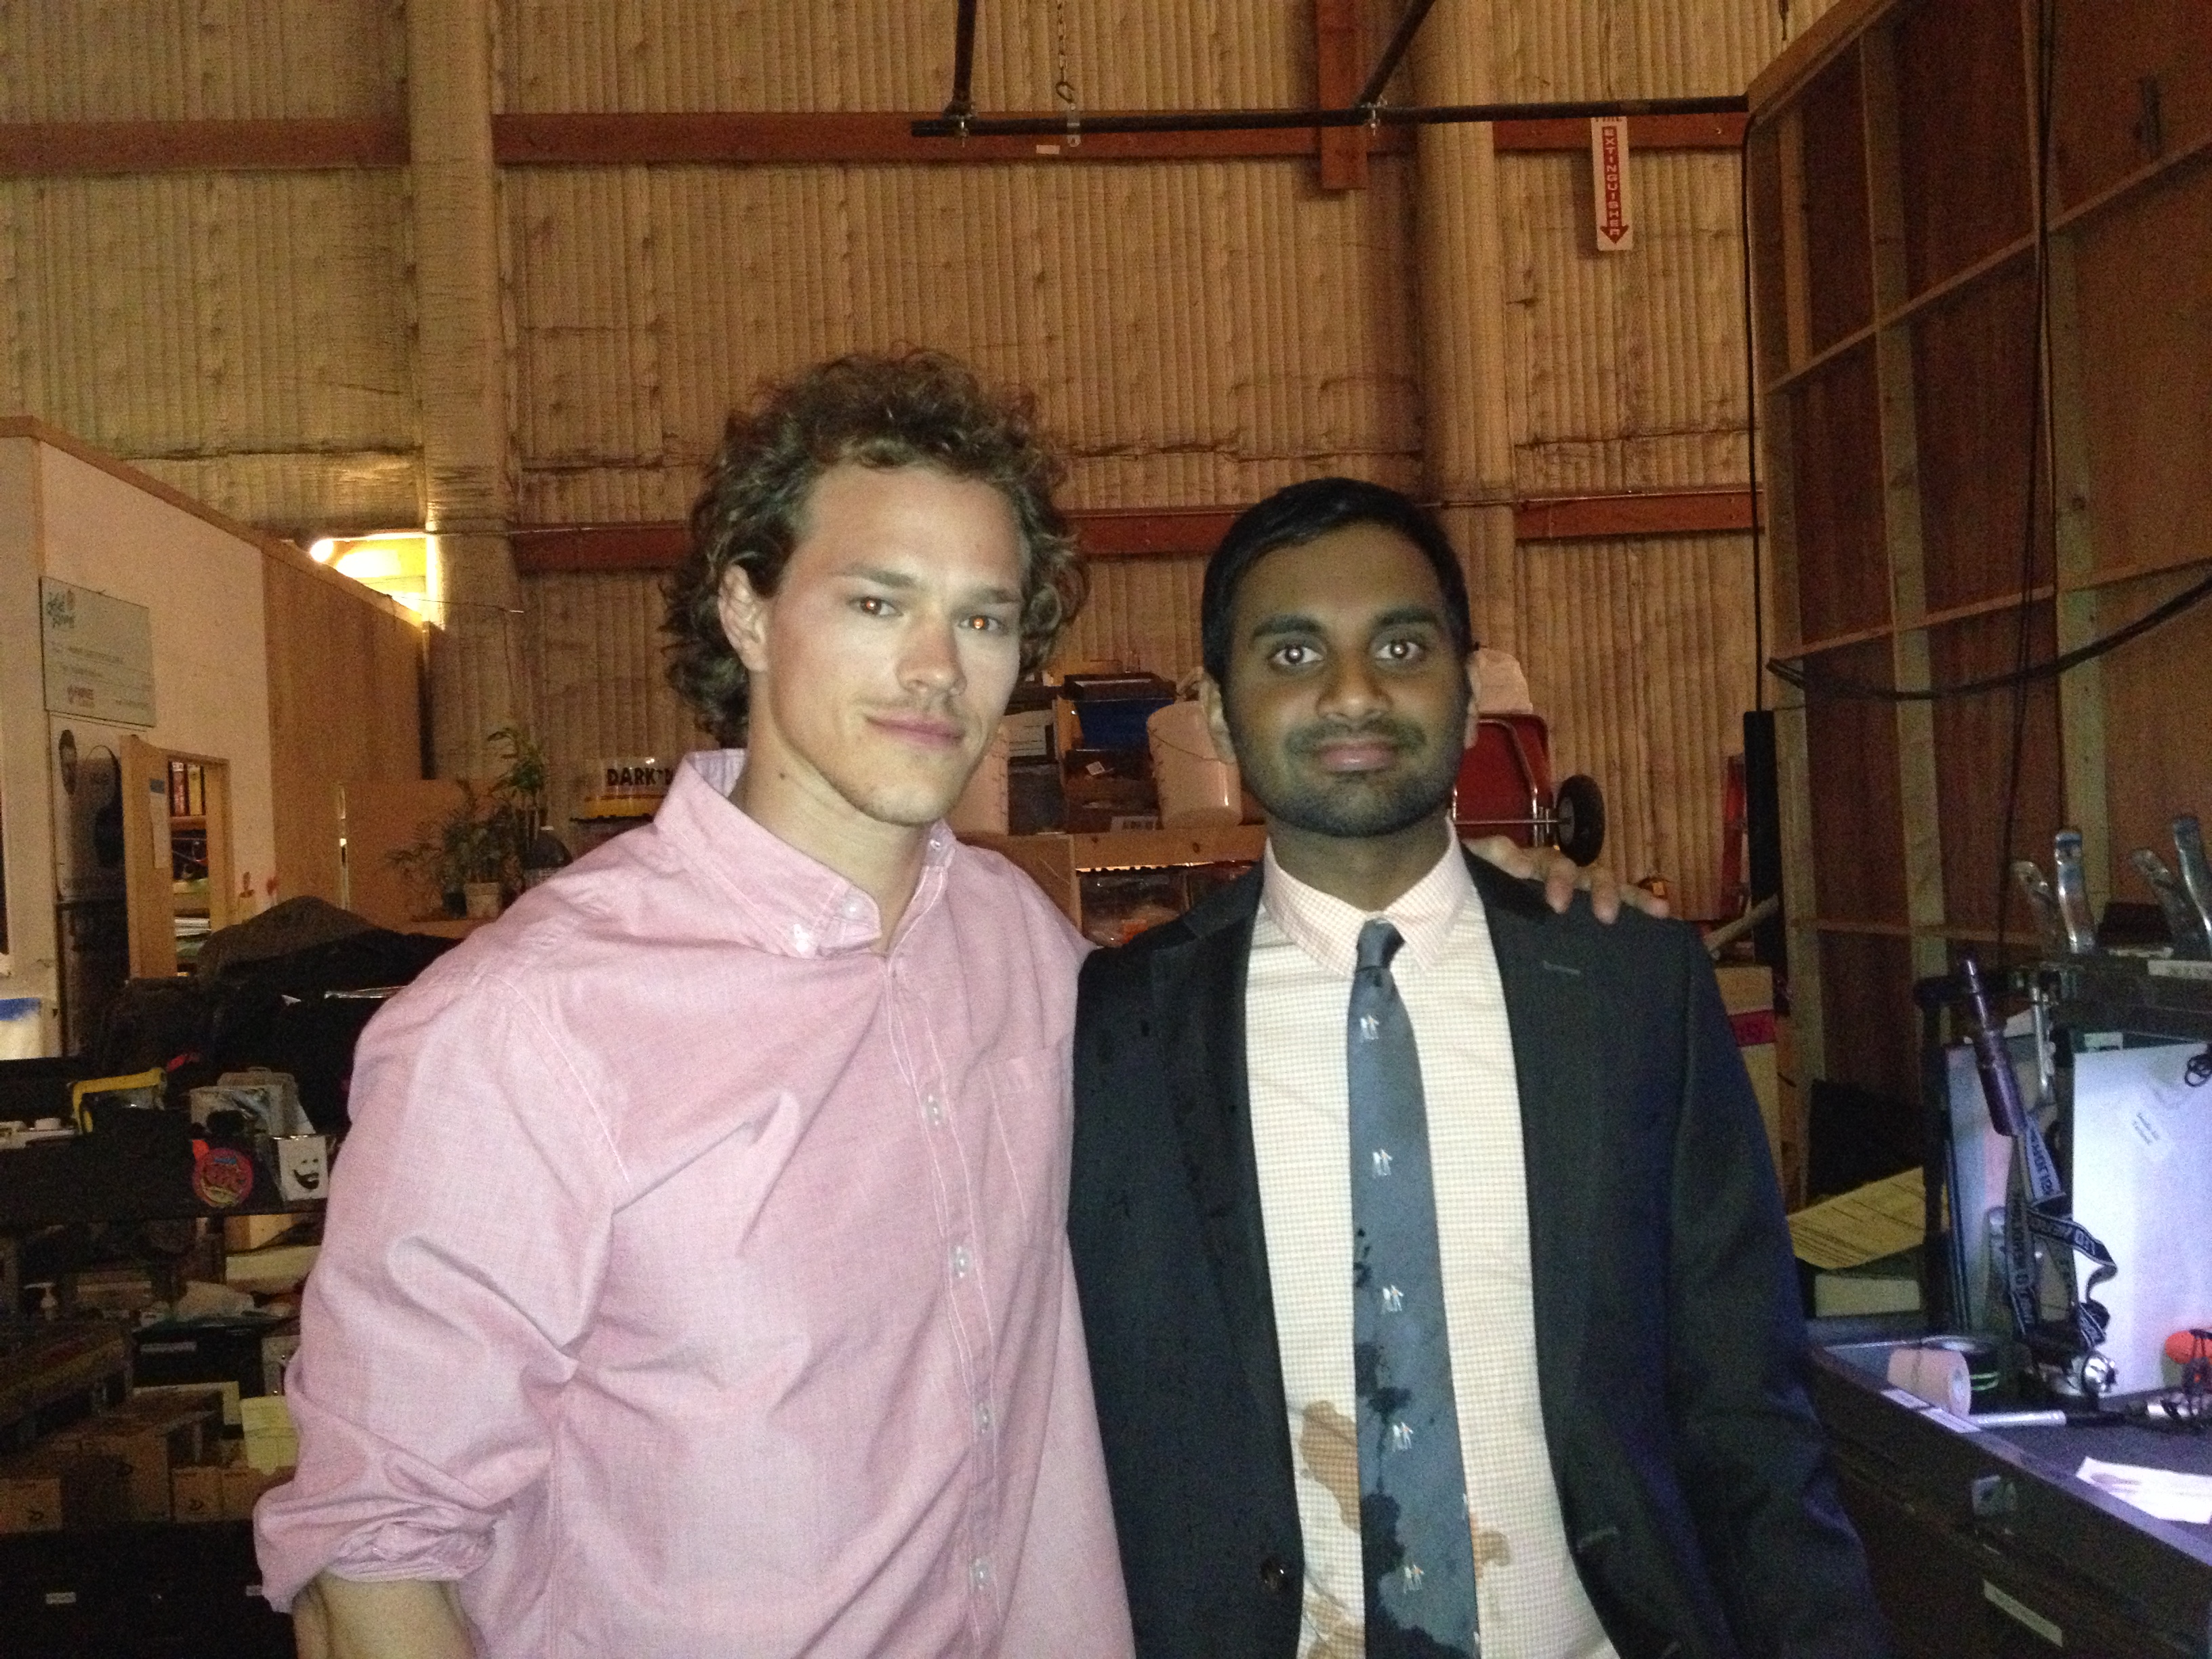 Ryan with Aziz Ansari on set of PARKS AND RECREATION Ep520 